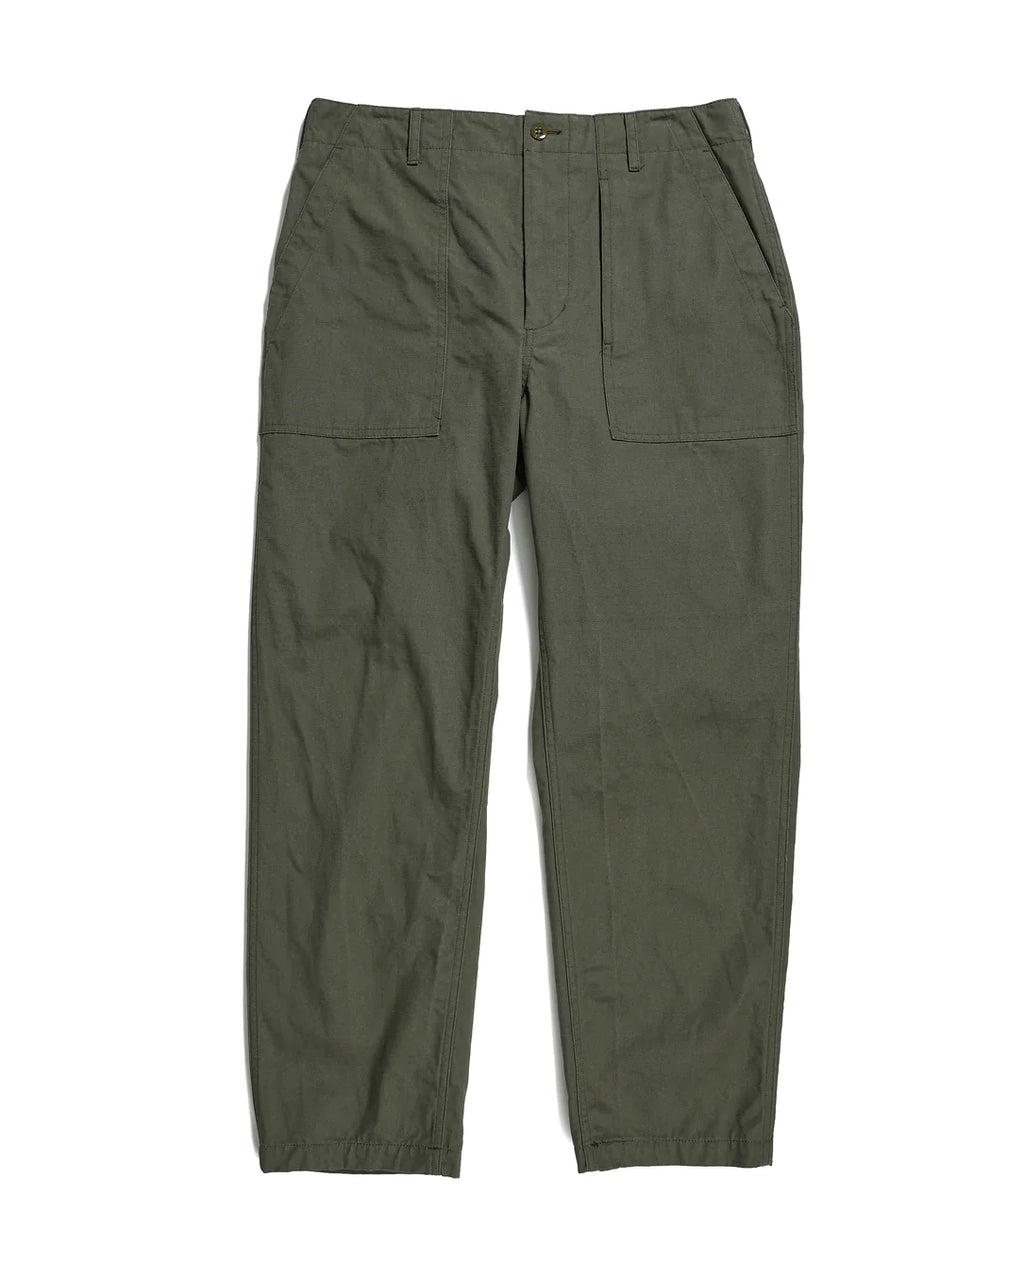 Engineered Garments Olive Heavy Cotton Ripstop Fatigue Pant